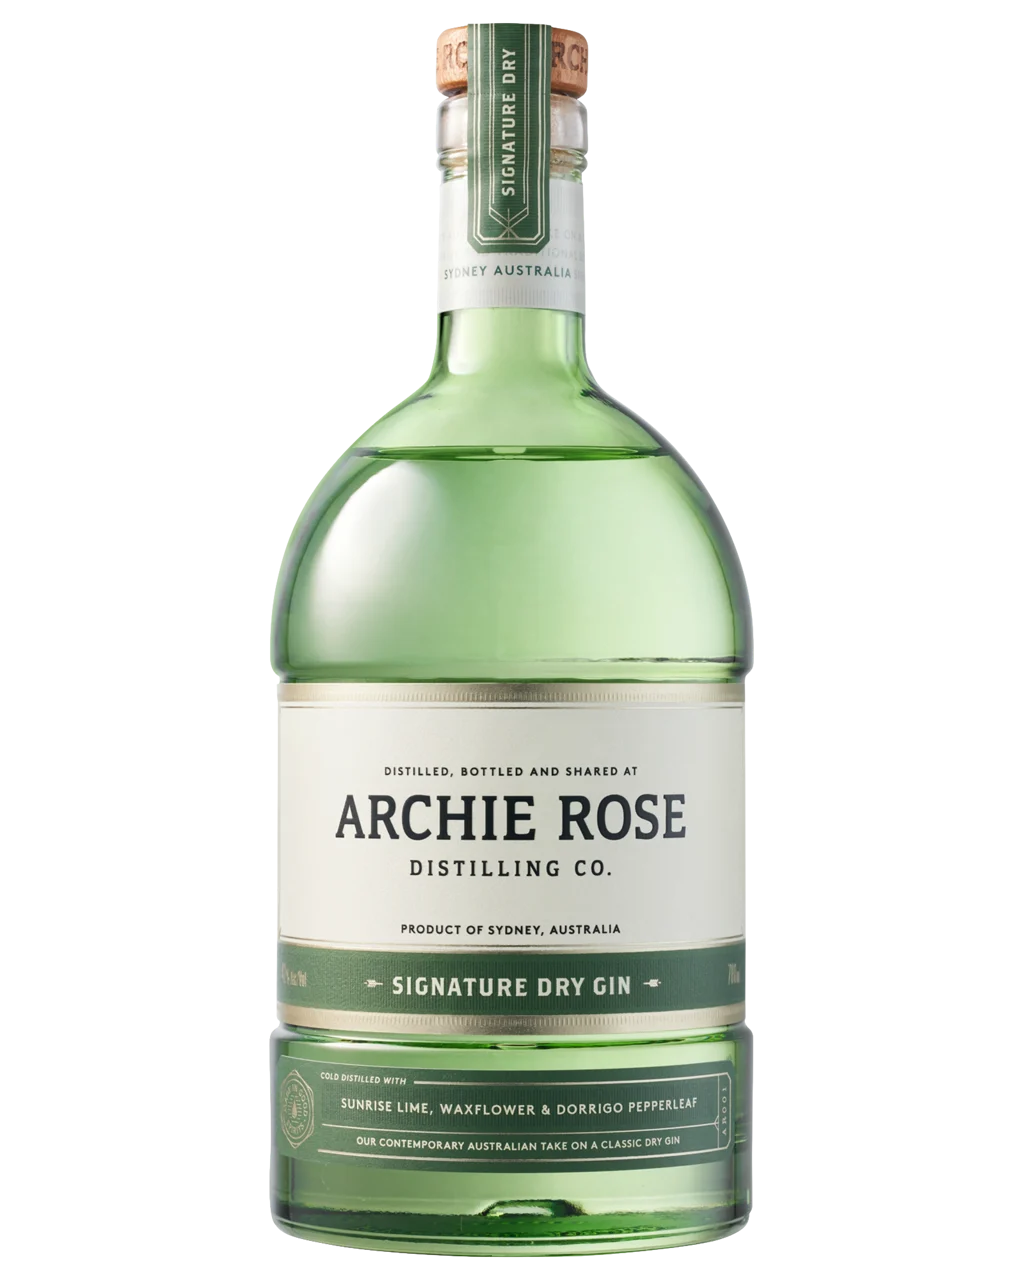 Archie Rose Dry Gin